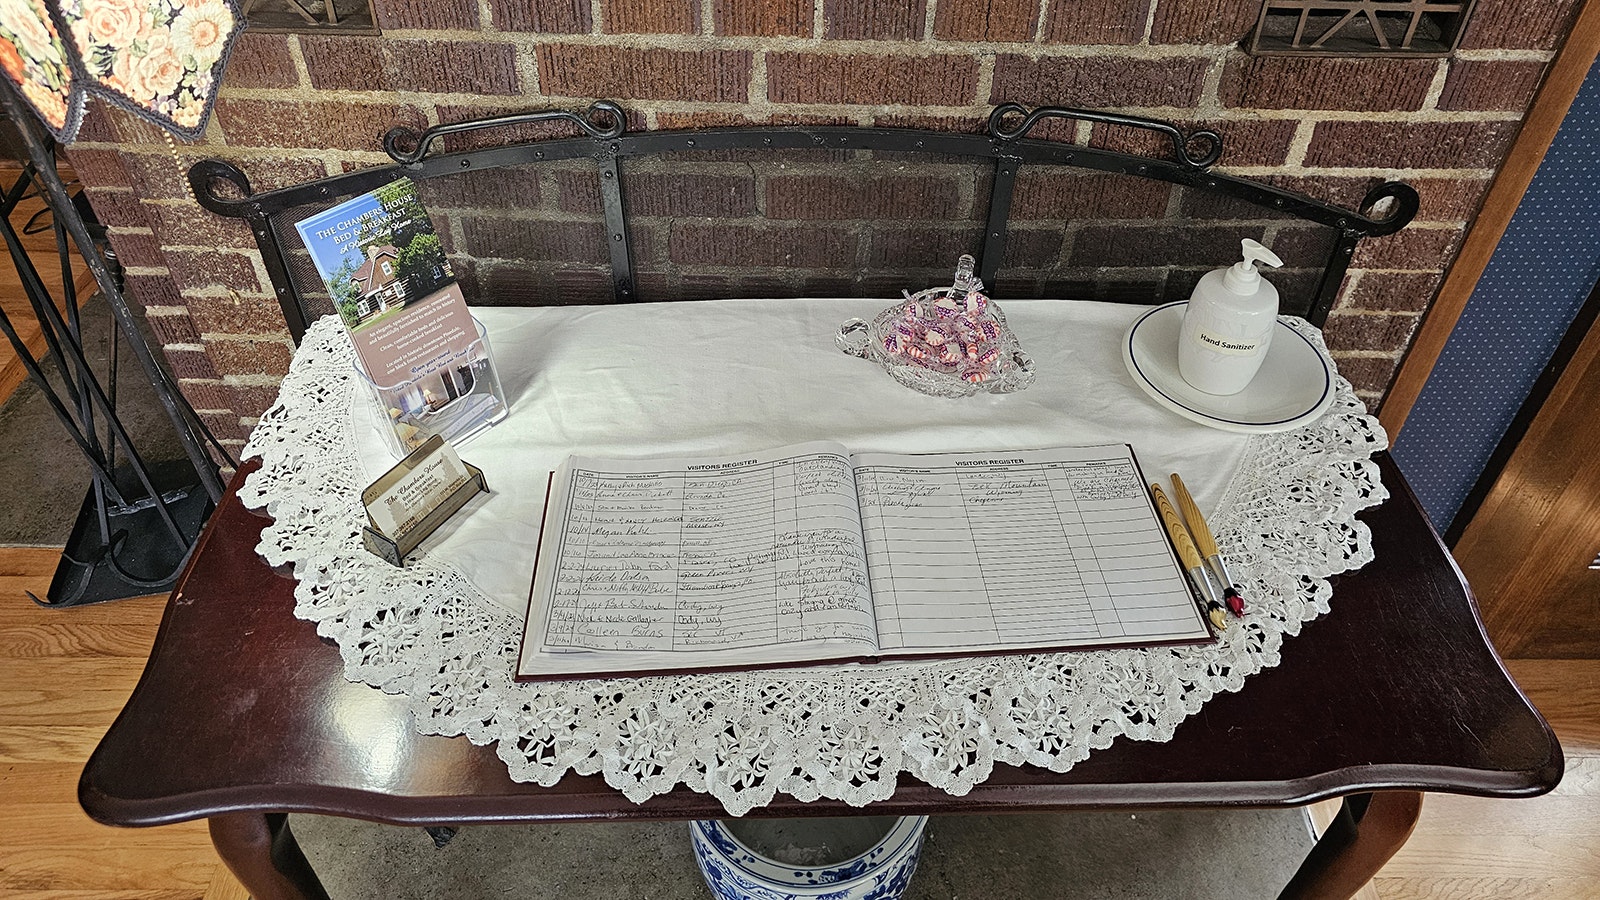 A guest book at Chambers House Bed and Breakfast has signatures of people from all over the country.